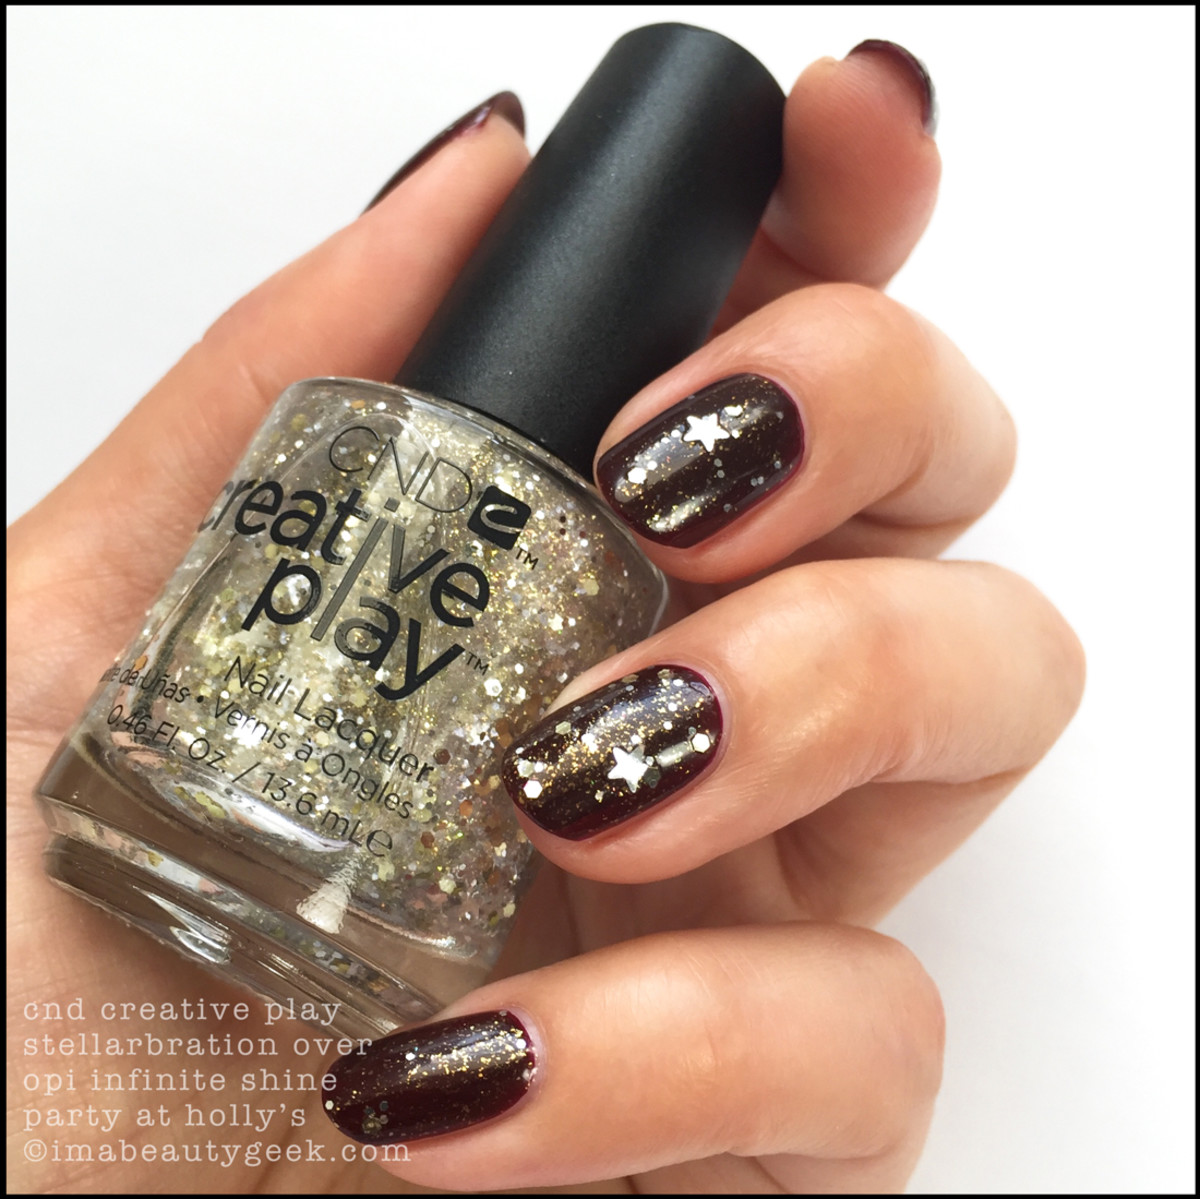 OPI Party at Hollys Infinite Shine_OPI Breakfast at Tiffanys Holiday Swatches Review